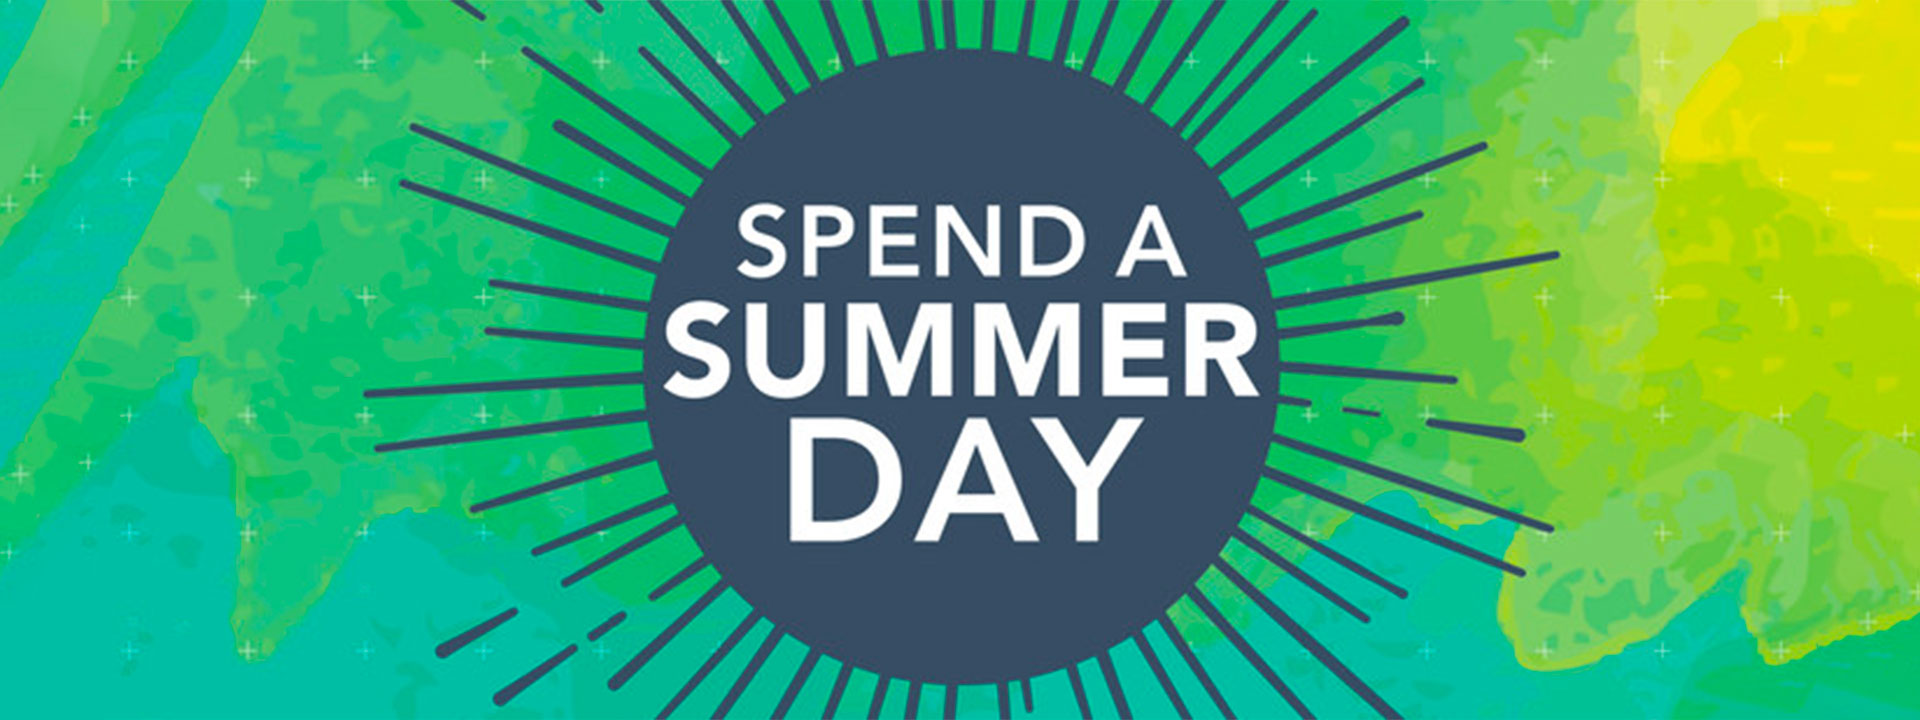 Penn State Spend a Summer Day logo